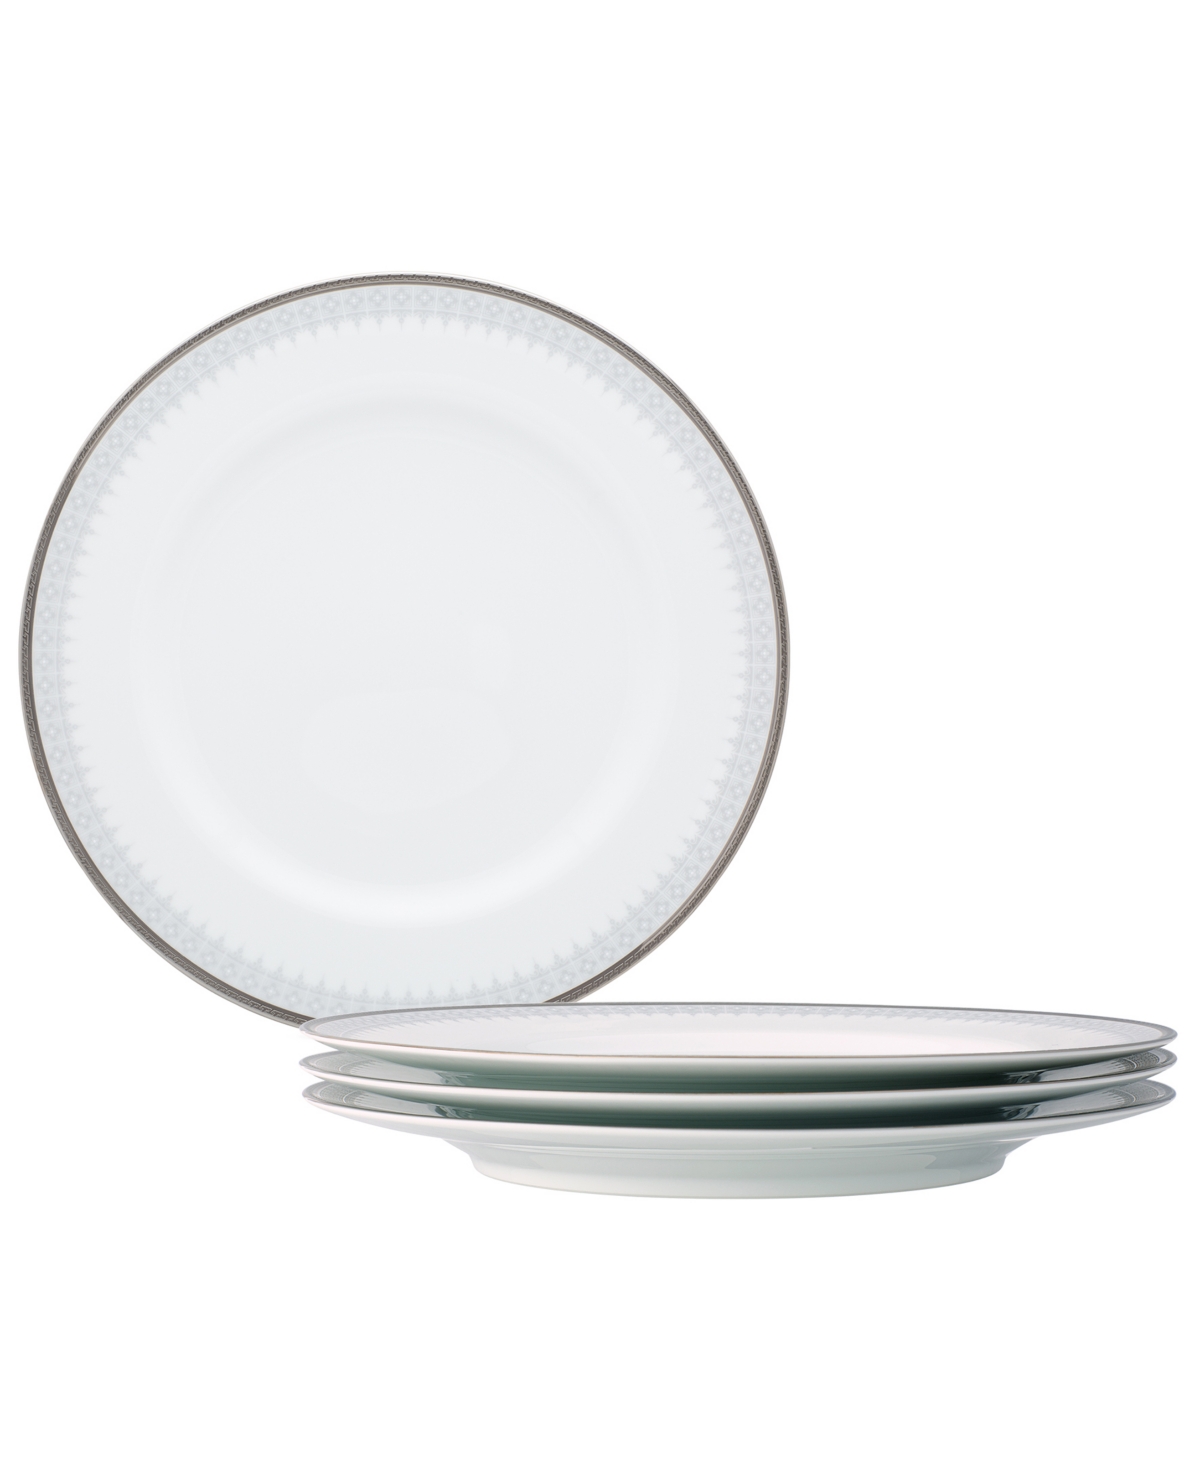 Noritake Silver Colonnade 4 Piece Dinner Plate Set, Service For 4 In White